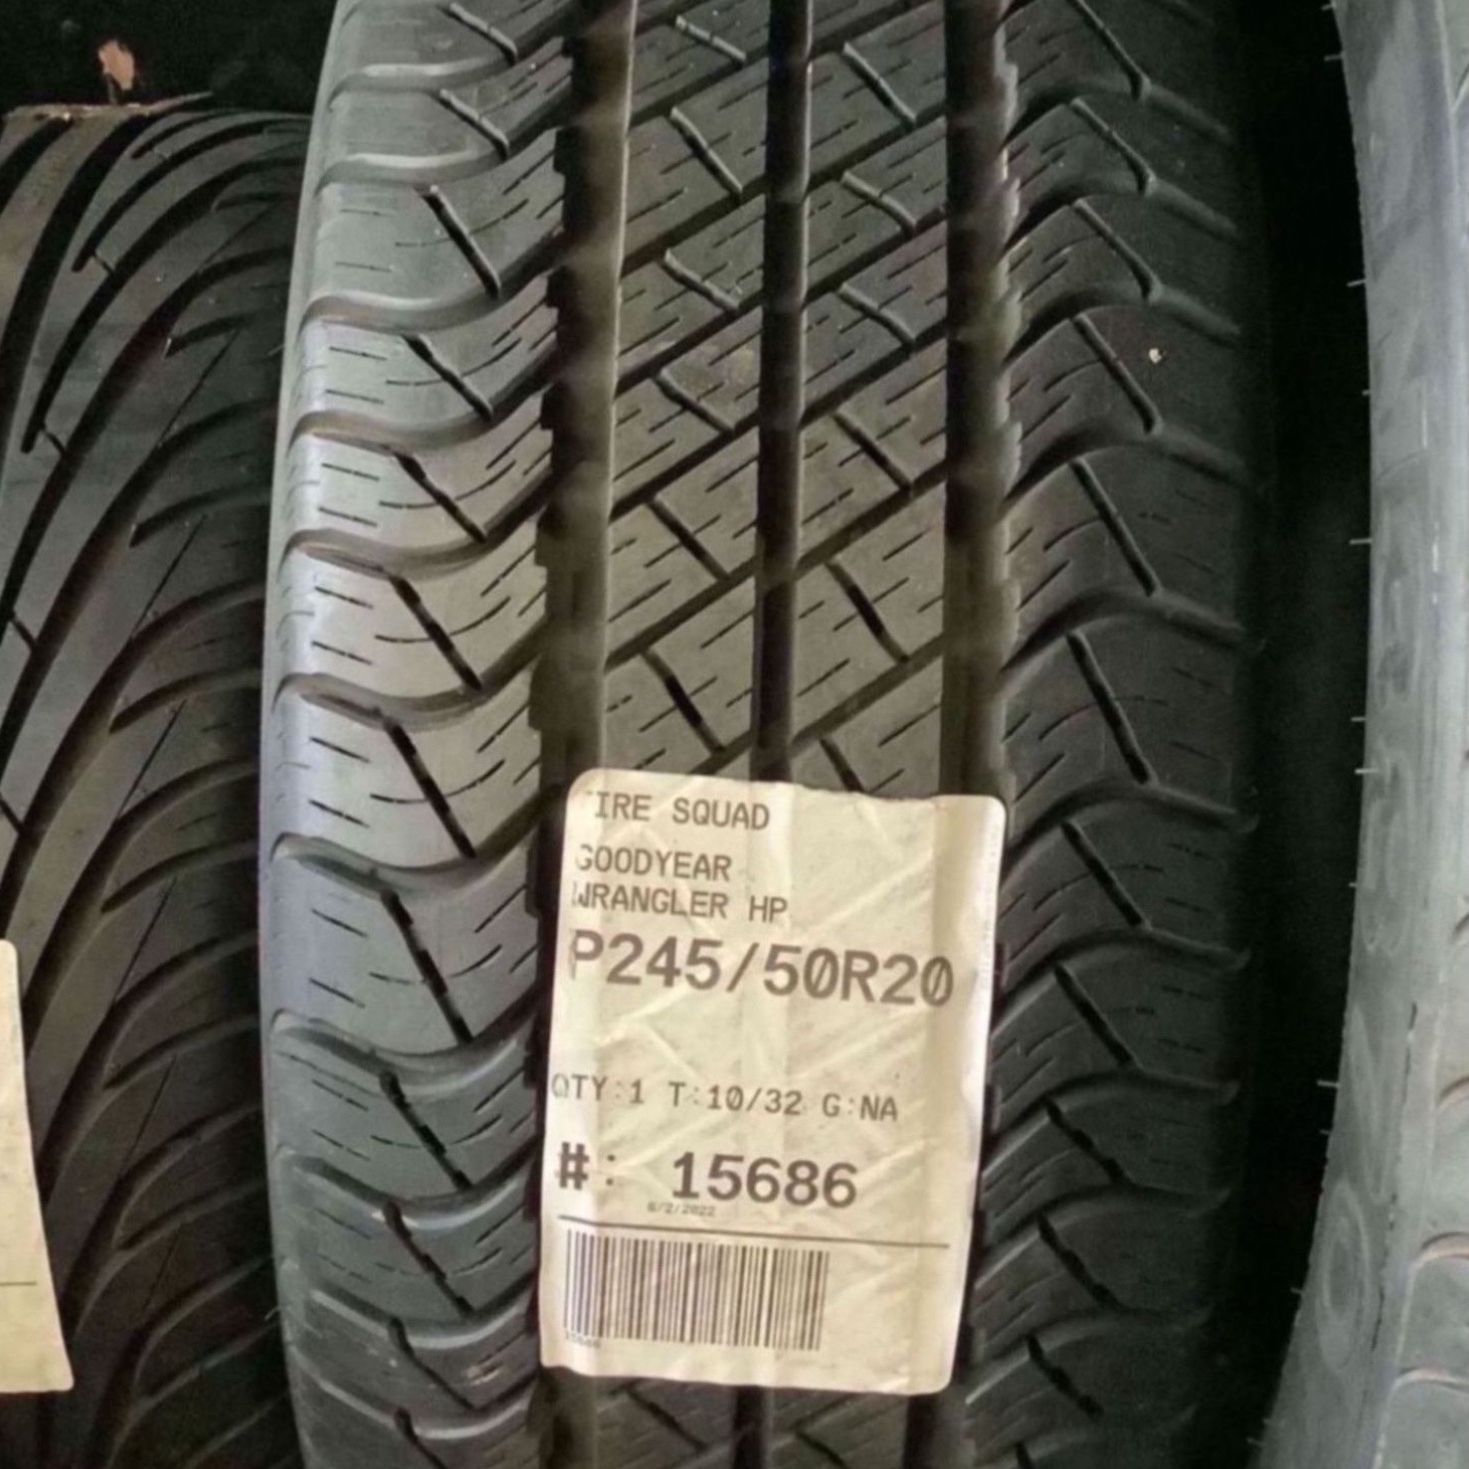 NEW 245 50 20 Goodyear Wrangler HP with 100% Tread 10/32 102S #15686 Best  Grade A Tires Today for Sale in Biscayne Park, FL - OfferUp